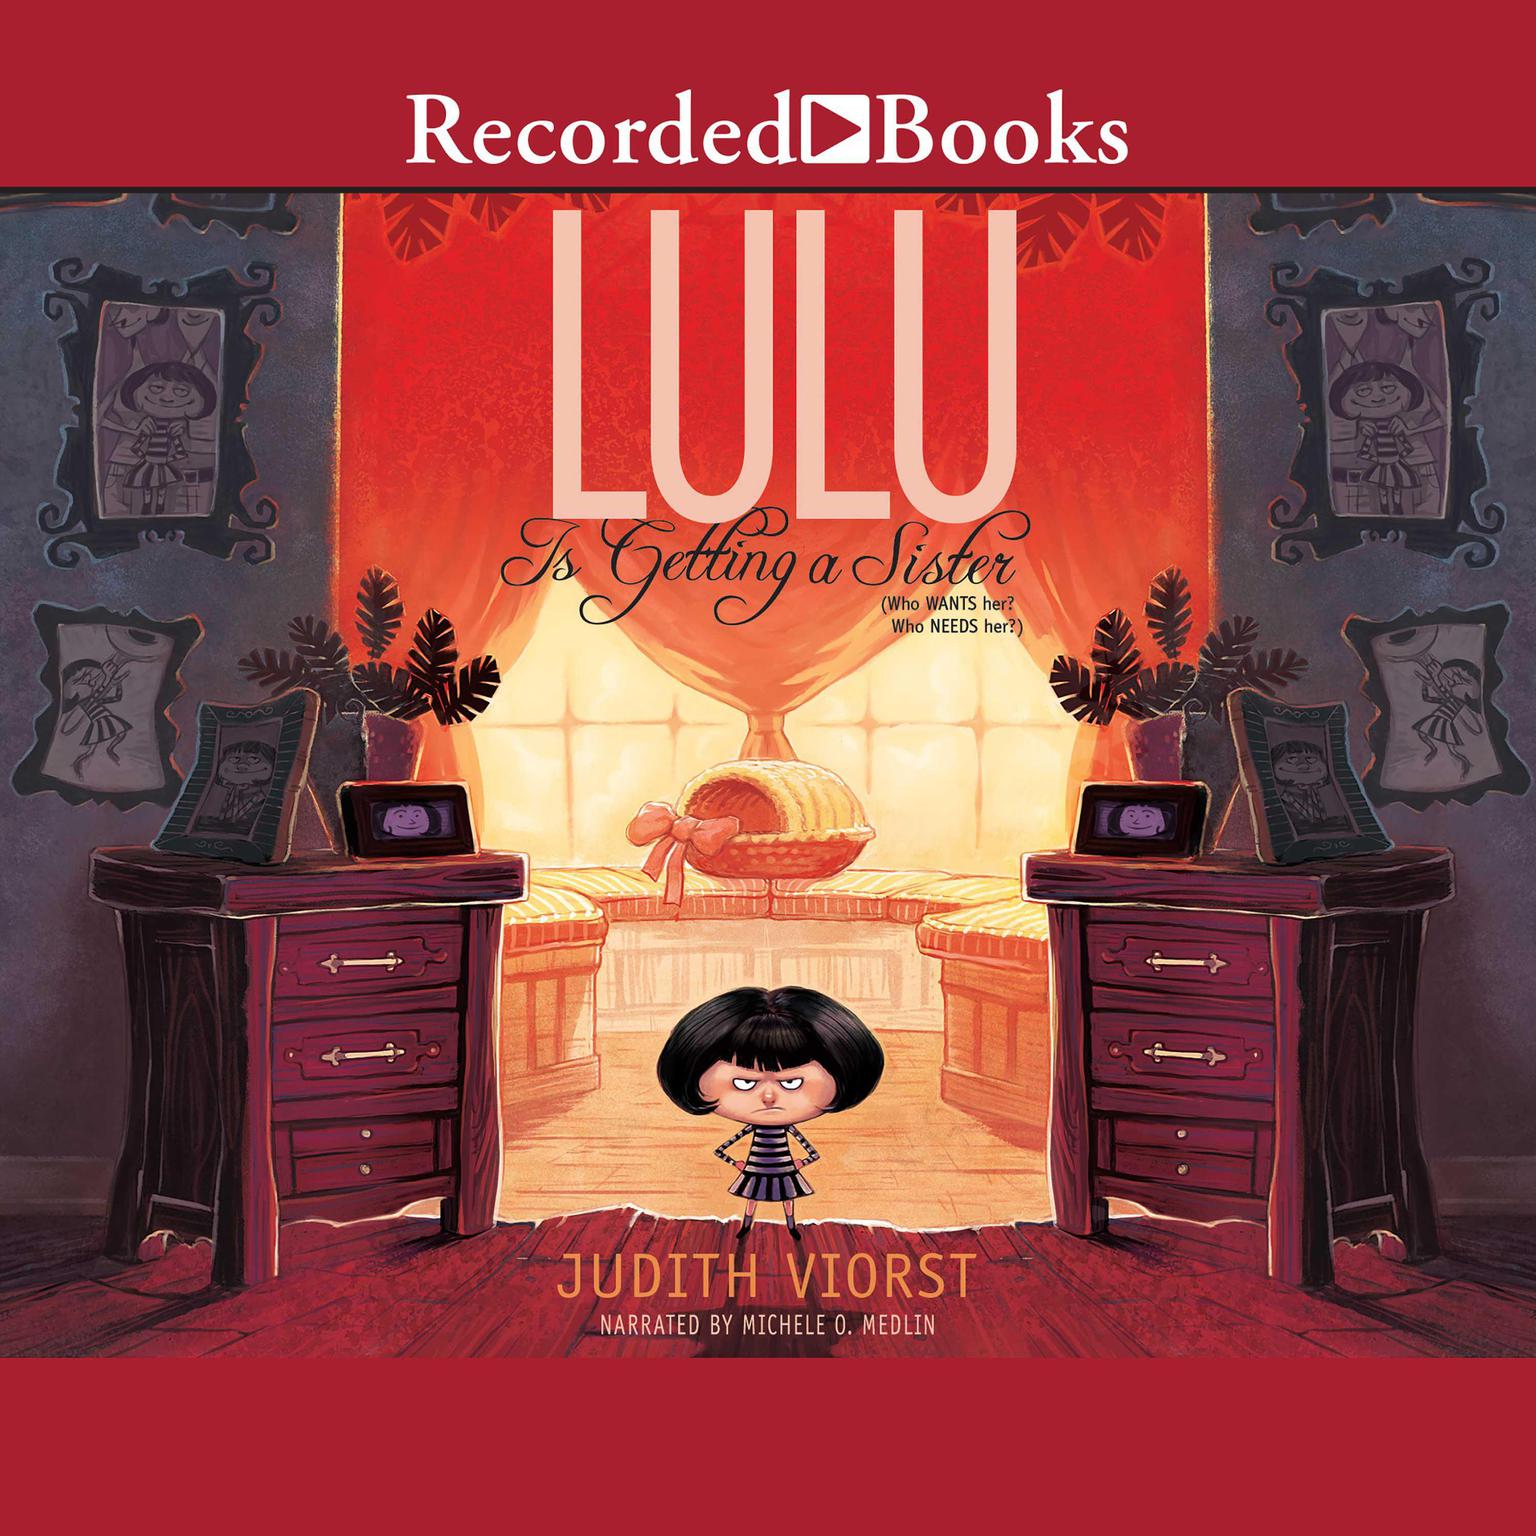 Lulu Is Getting a Sister Audiobook by Judith Viorst — Download Now